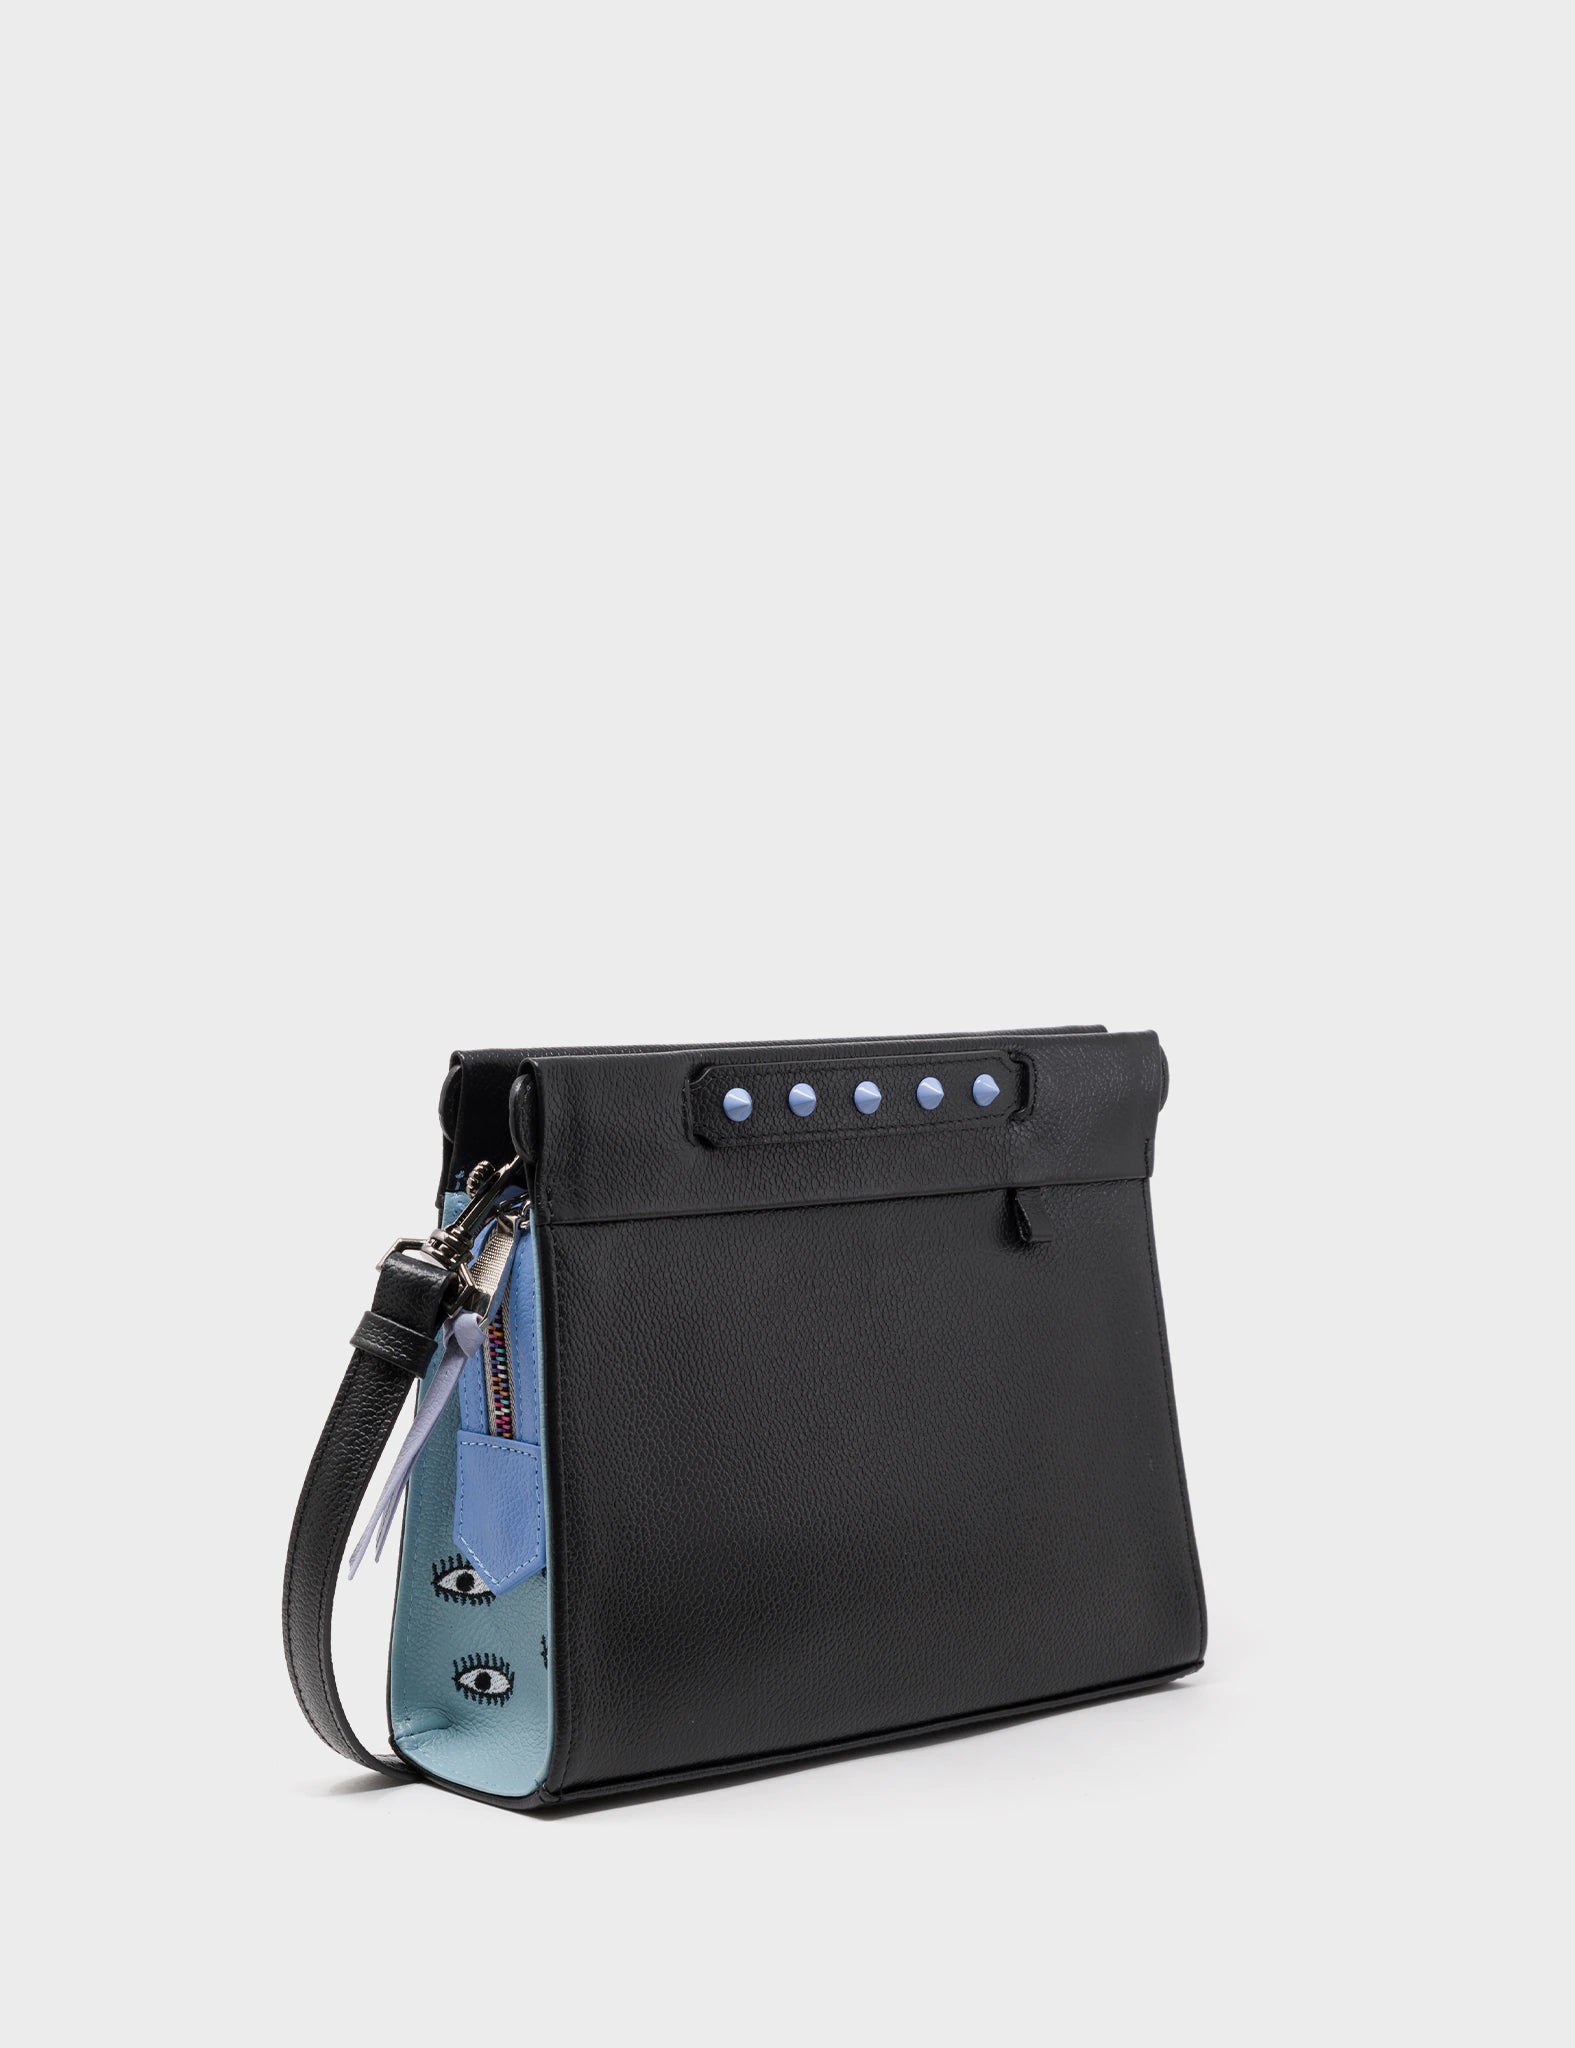 Black Leather Hip Bag With Studs Small Convertible Crossbody 